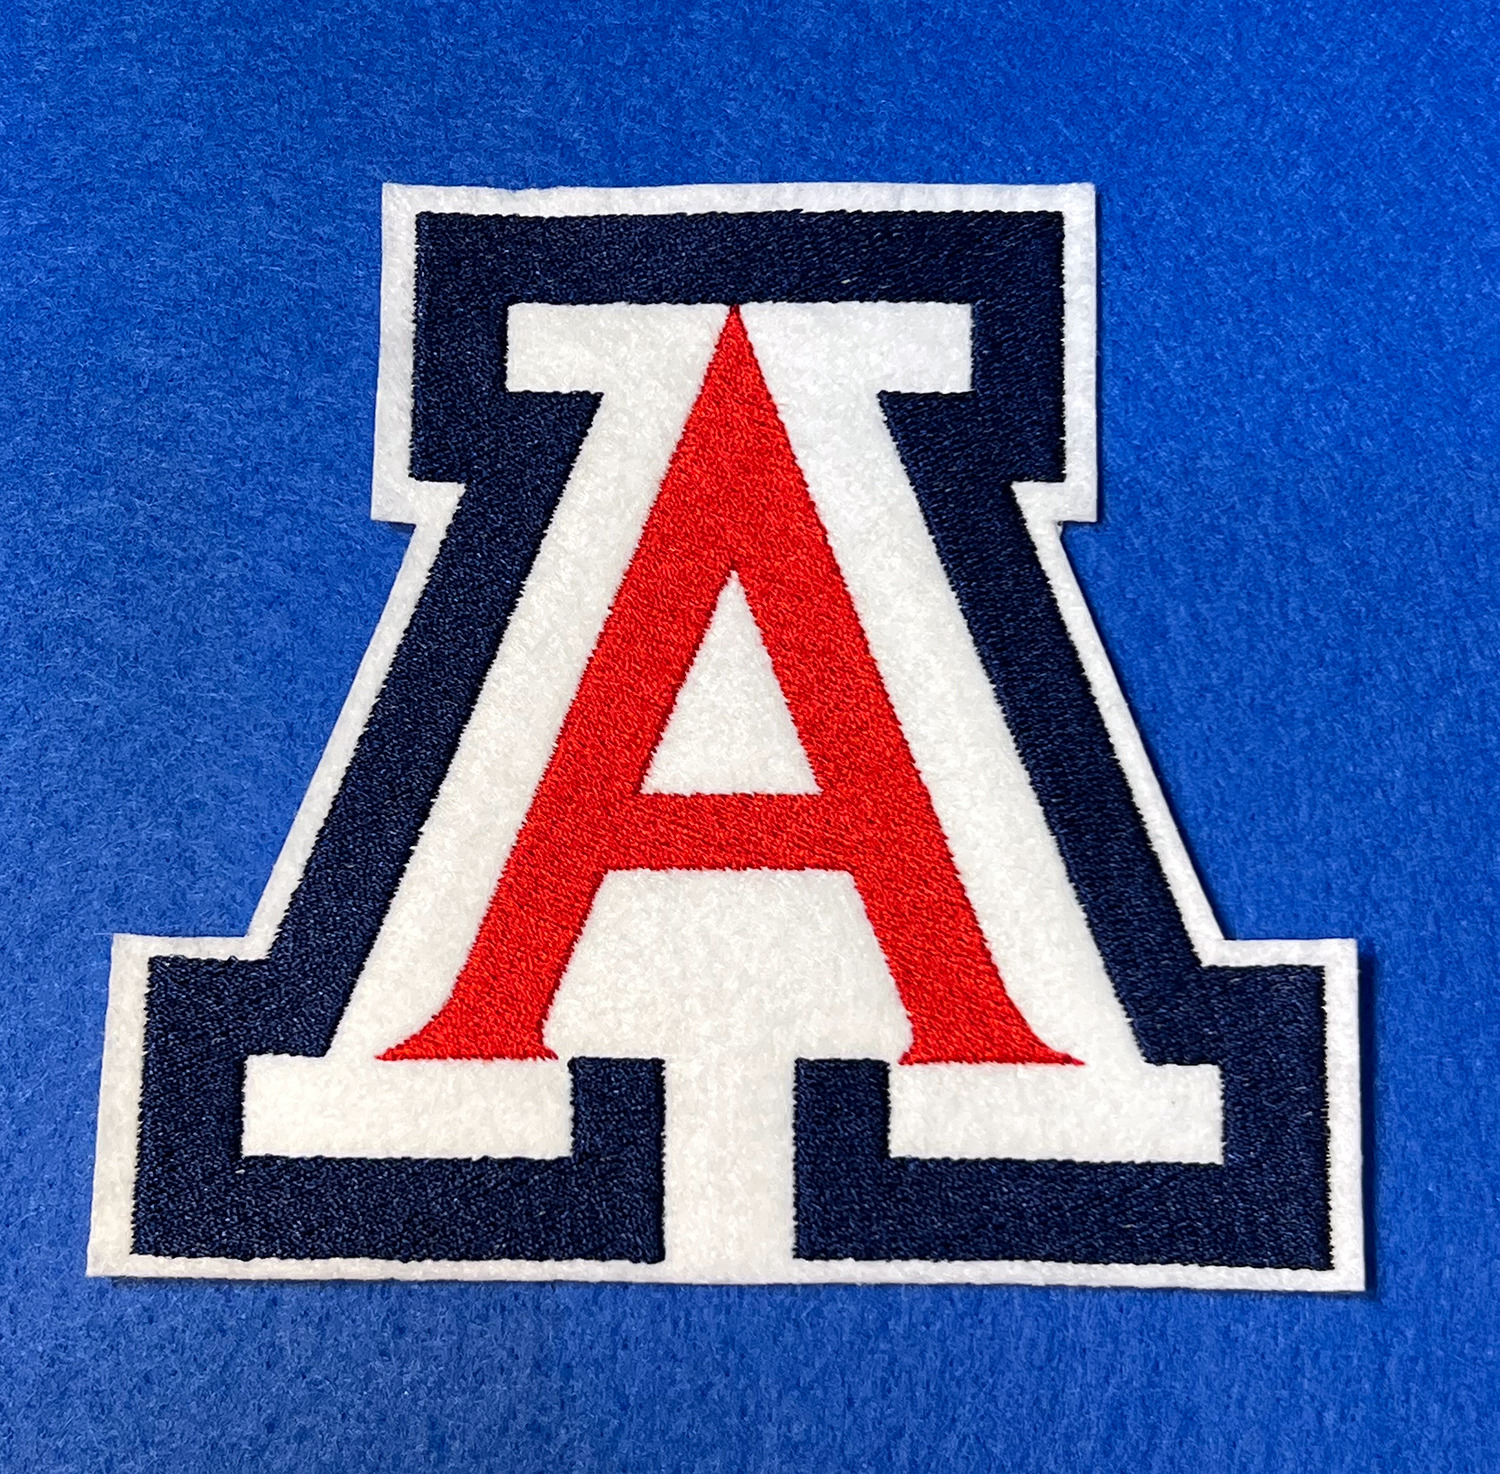 University of Arizona Embroidered Iron-on Patch - Licensed